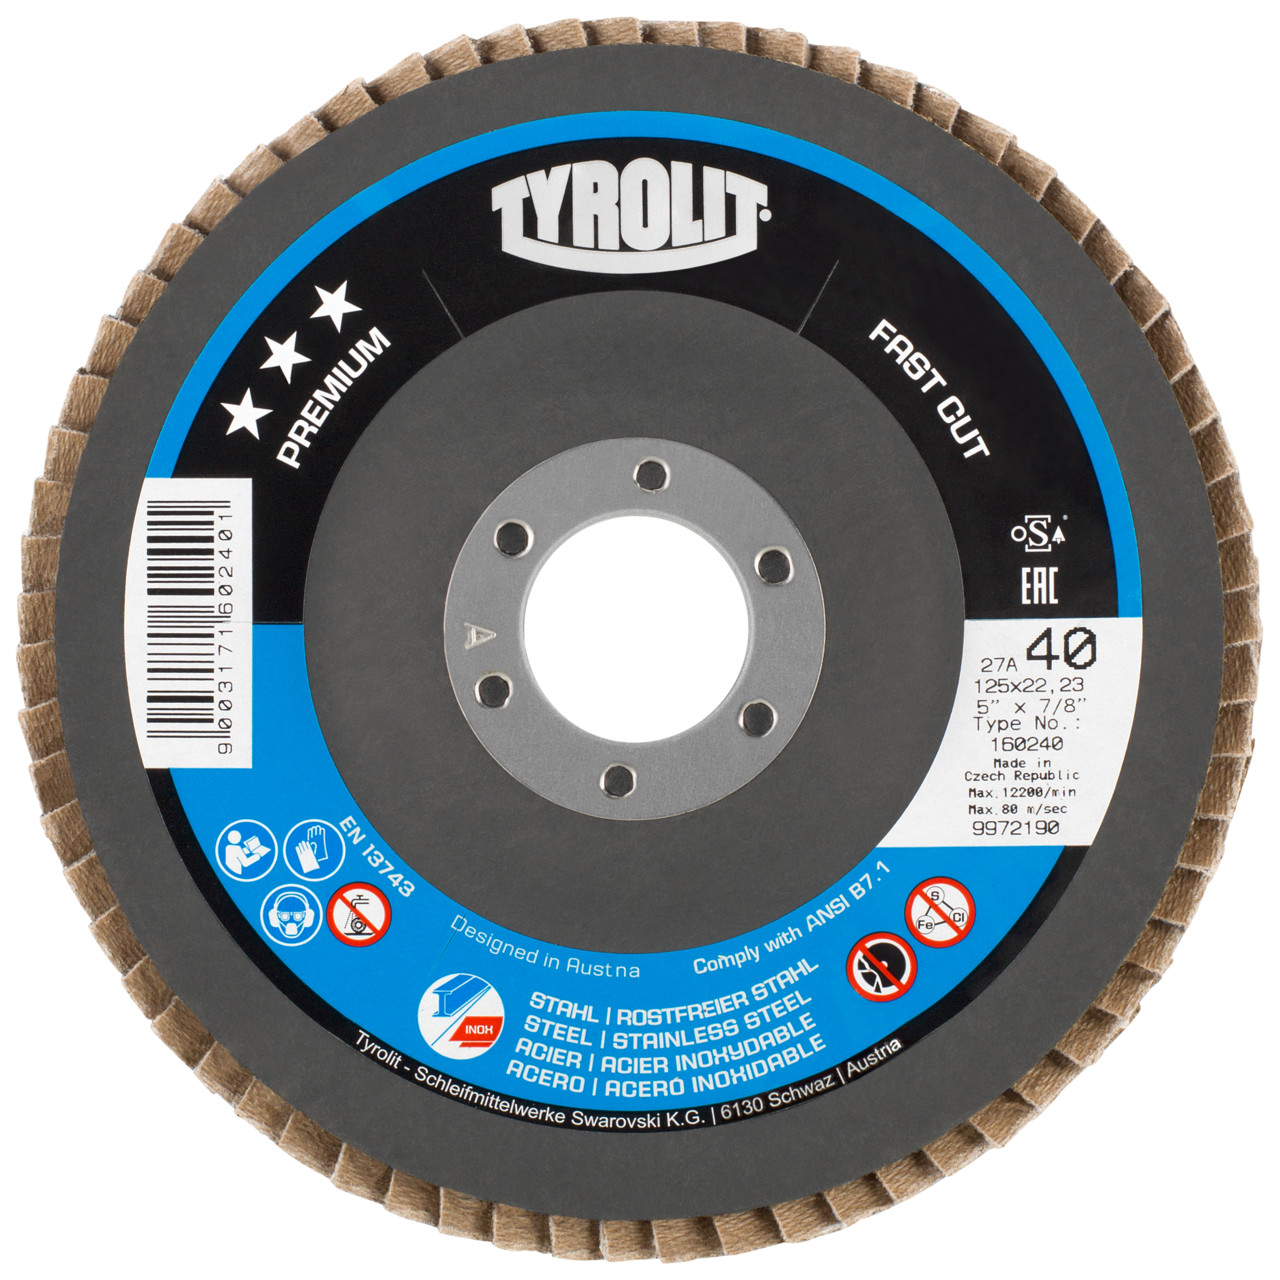 Tyrolit Serrated lock washer DxH 125x22.2 FASTCUT for steel &amp; stainless steel, P80, shape: 27A - offset version (glass fibre carrier body version), Art. 160244